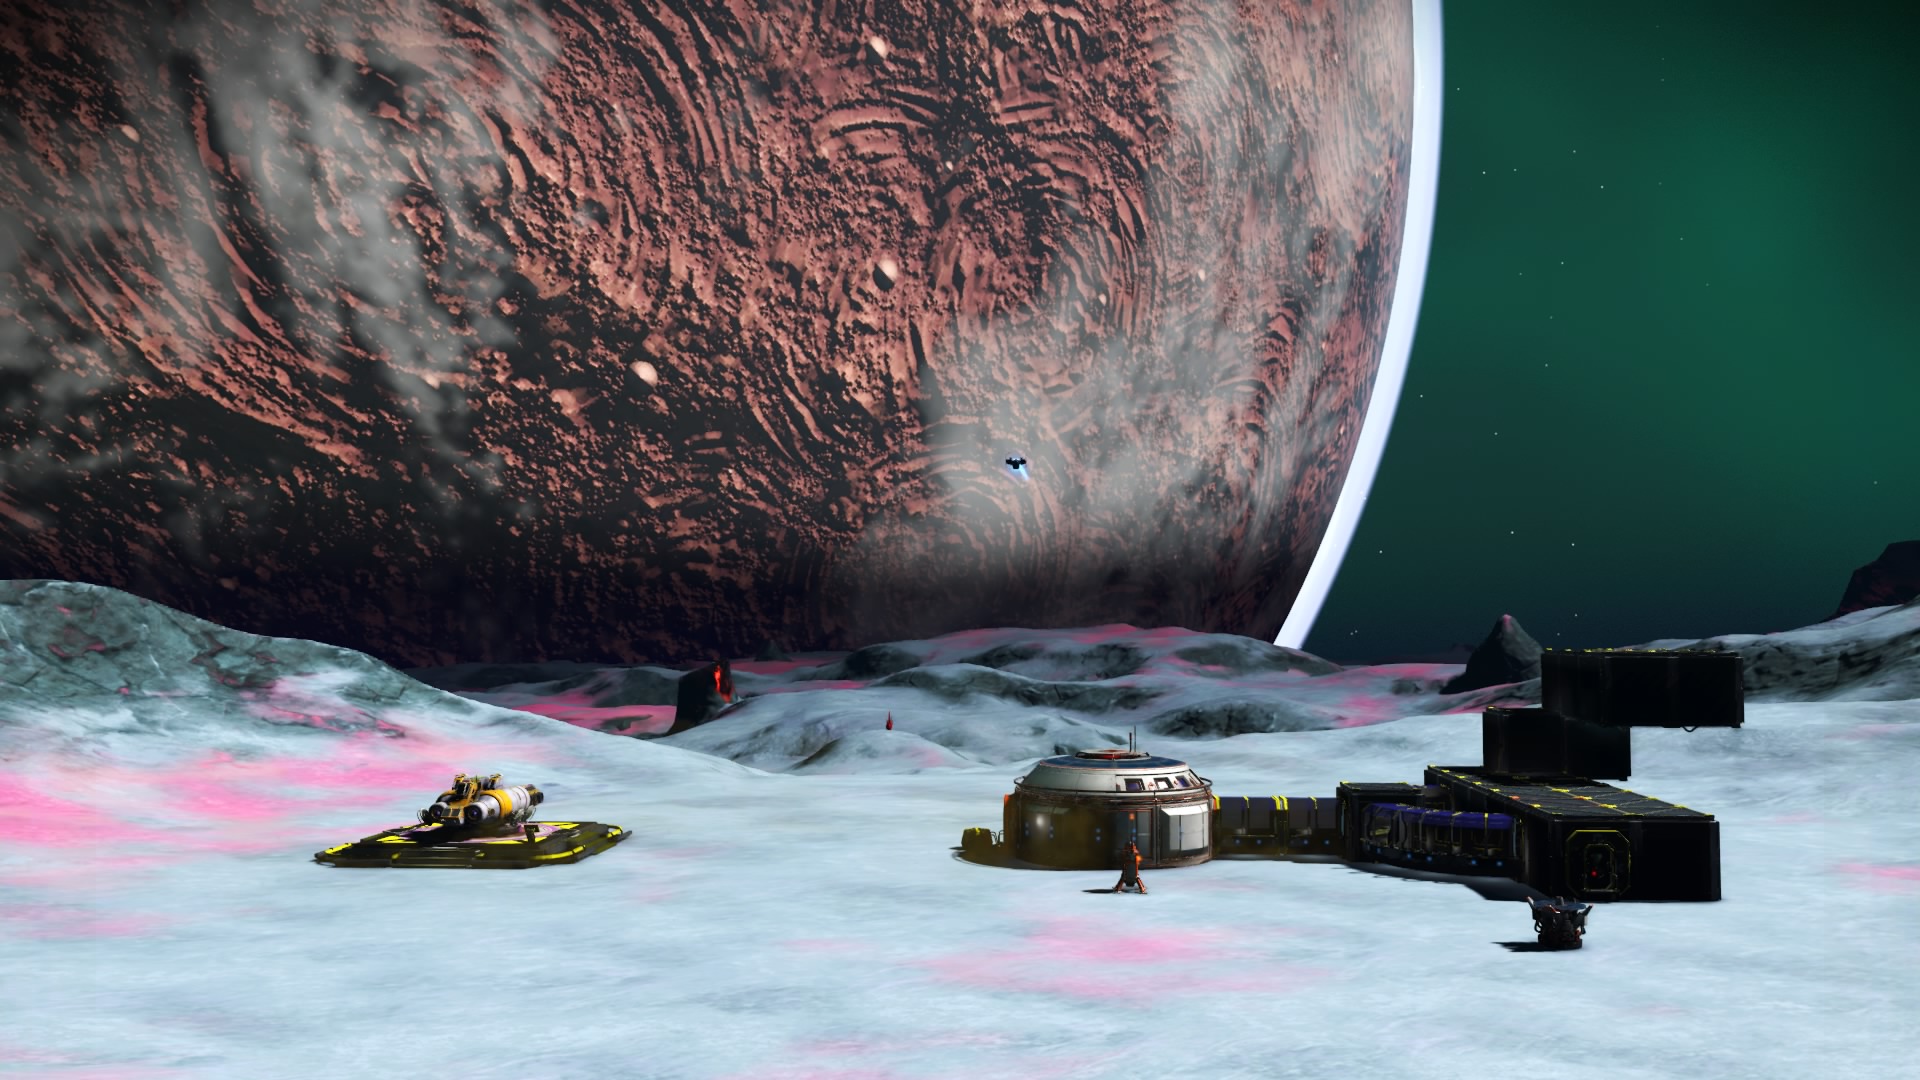 Screenshot of a location in the No Man's Sky video game showing a moon and the Arpinsarypov Mother Base.